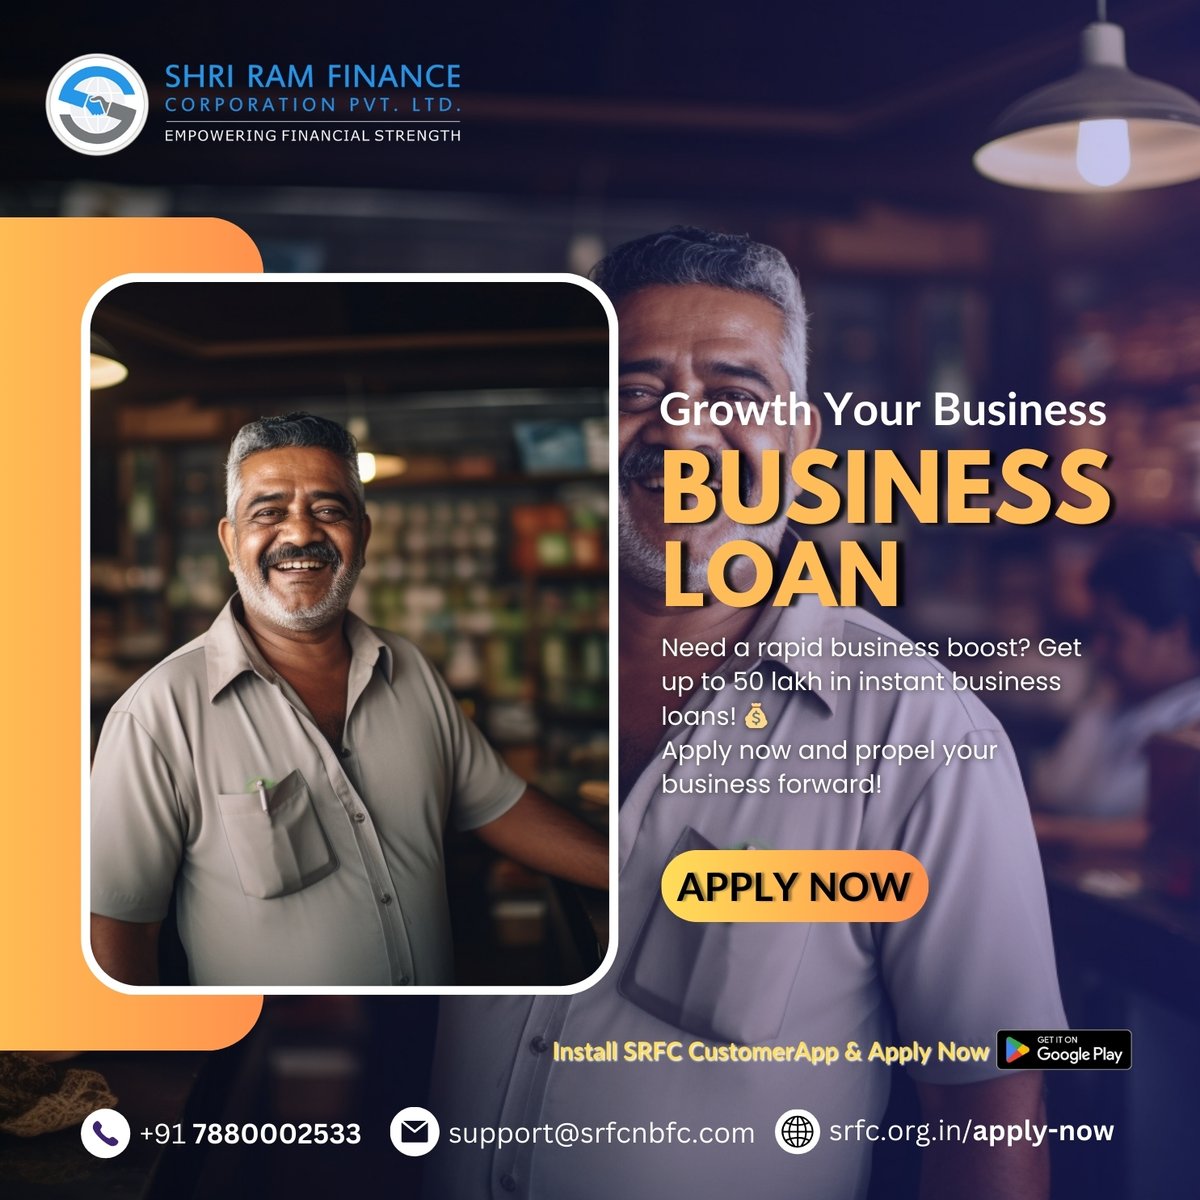 Need a quick boost for your business? Look no further!  Get an instant business loan of up to 50 lakh with us! Apply now and take your business to the next level! 
#srfcnbfc #shriramfinance #srfcloan #upgradeyourbusiness #instantloans #BusinessLoans #GrowYourBusiness #Finance